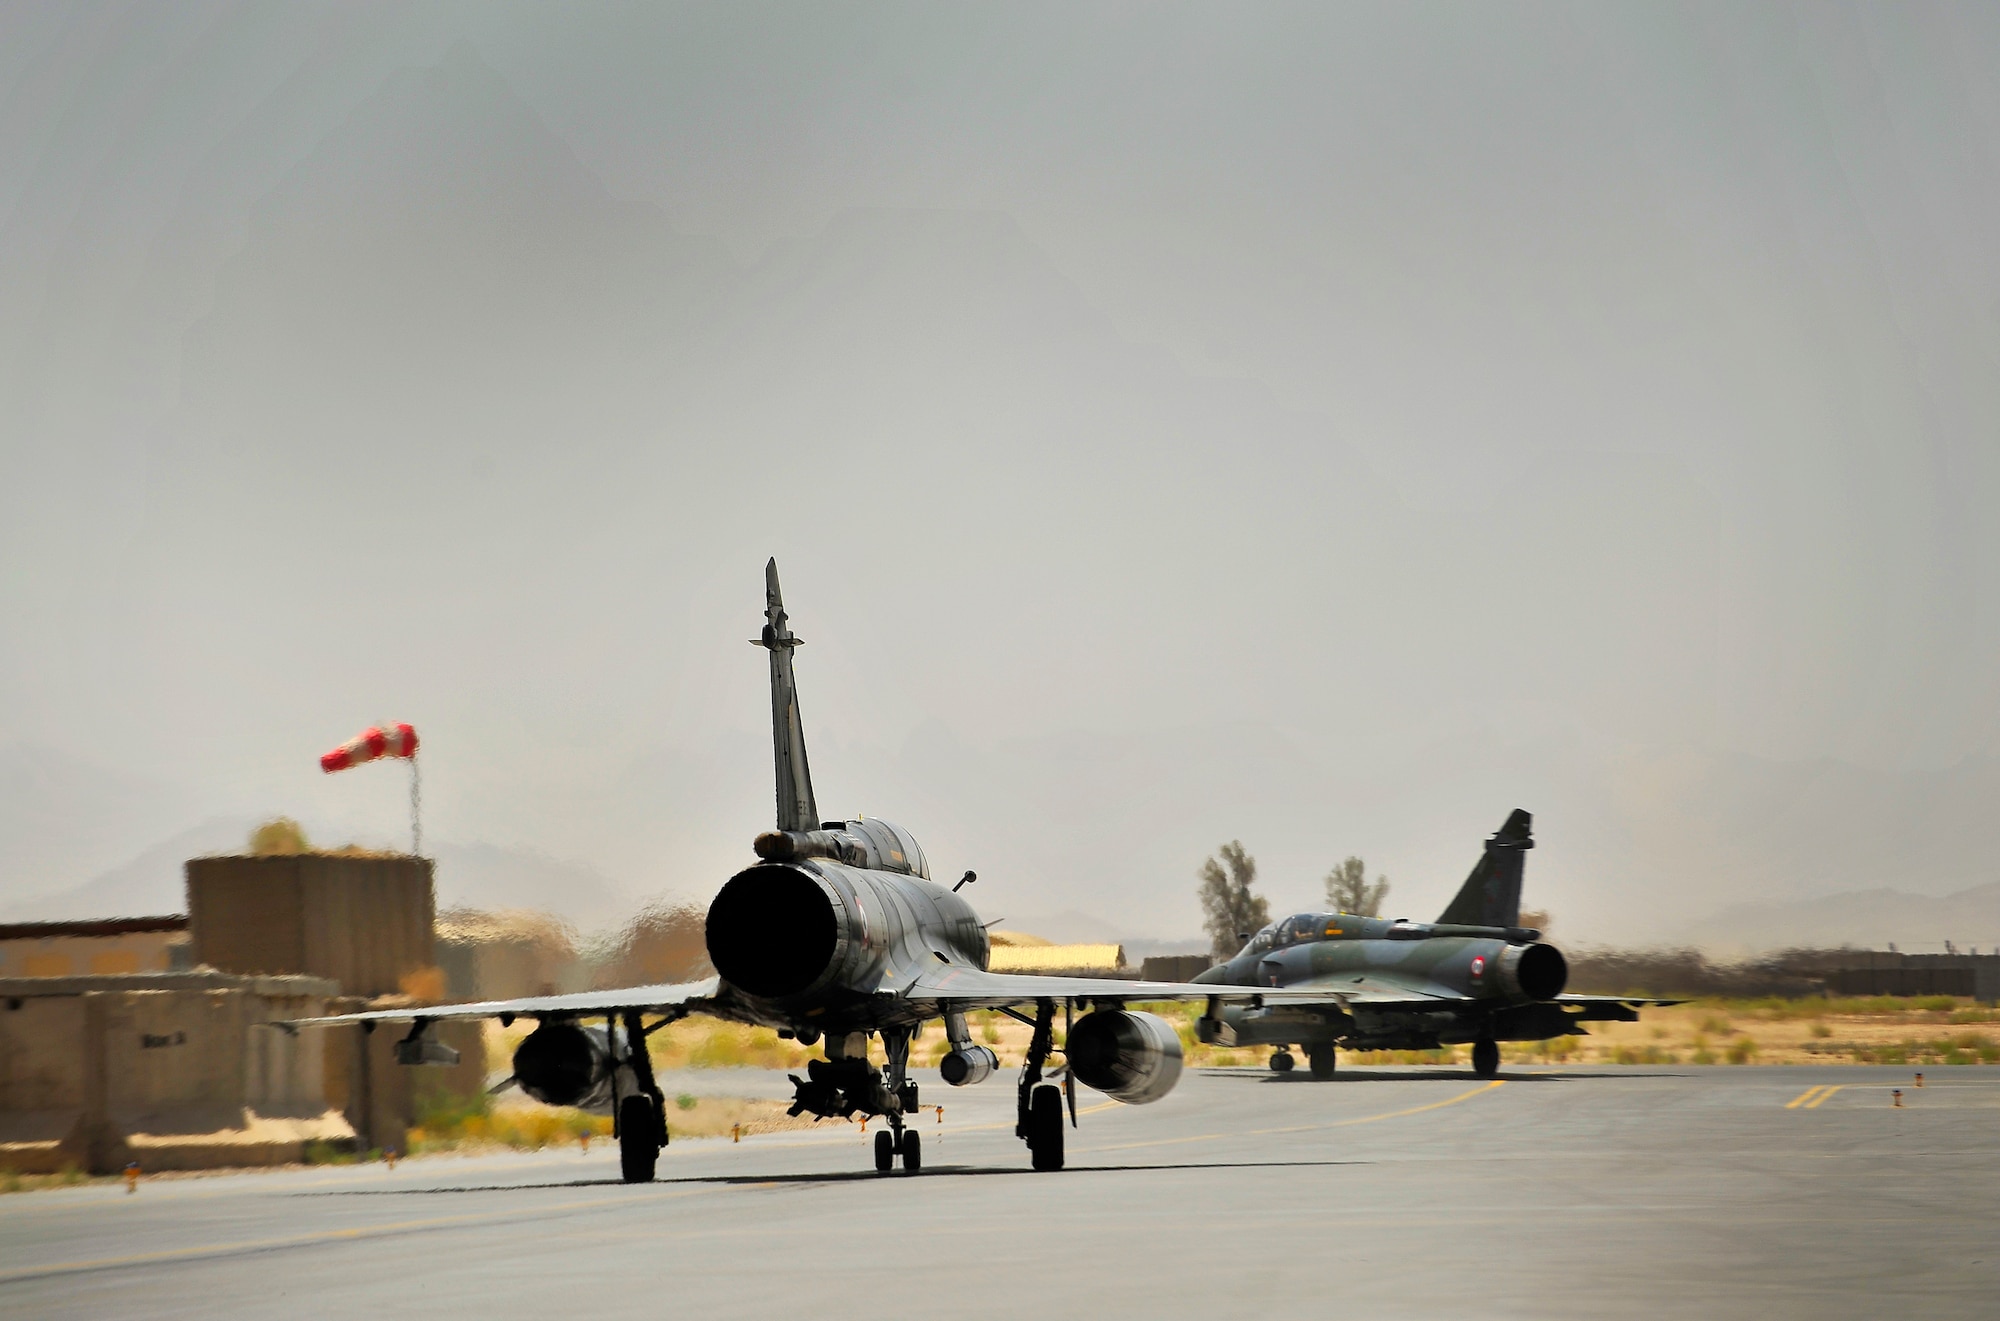 Members of the French Air Force, Detachment 3/3, taxi towards a takeoff point in the French's Mirage 2000-D before a combat mission at Kandahar Airfield, Afghanistan, June 15, 2012. The French AF has been a coalition partner with the U.S. during Operation Enduring Freedom (OEF) and perform air to ground close air support missions for friendly ground forces. (U.S. Air Force photo/Staff Sgt. Clay Lancaster)
